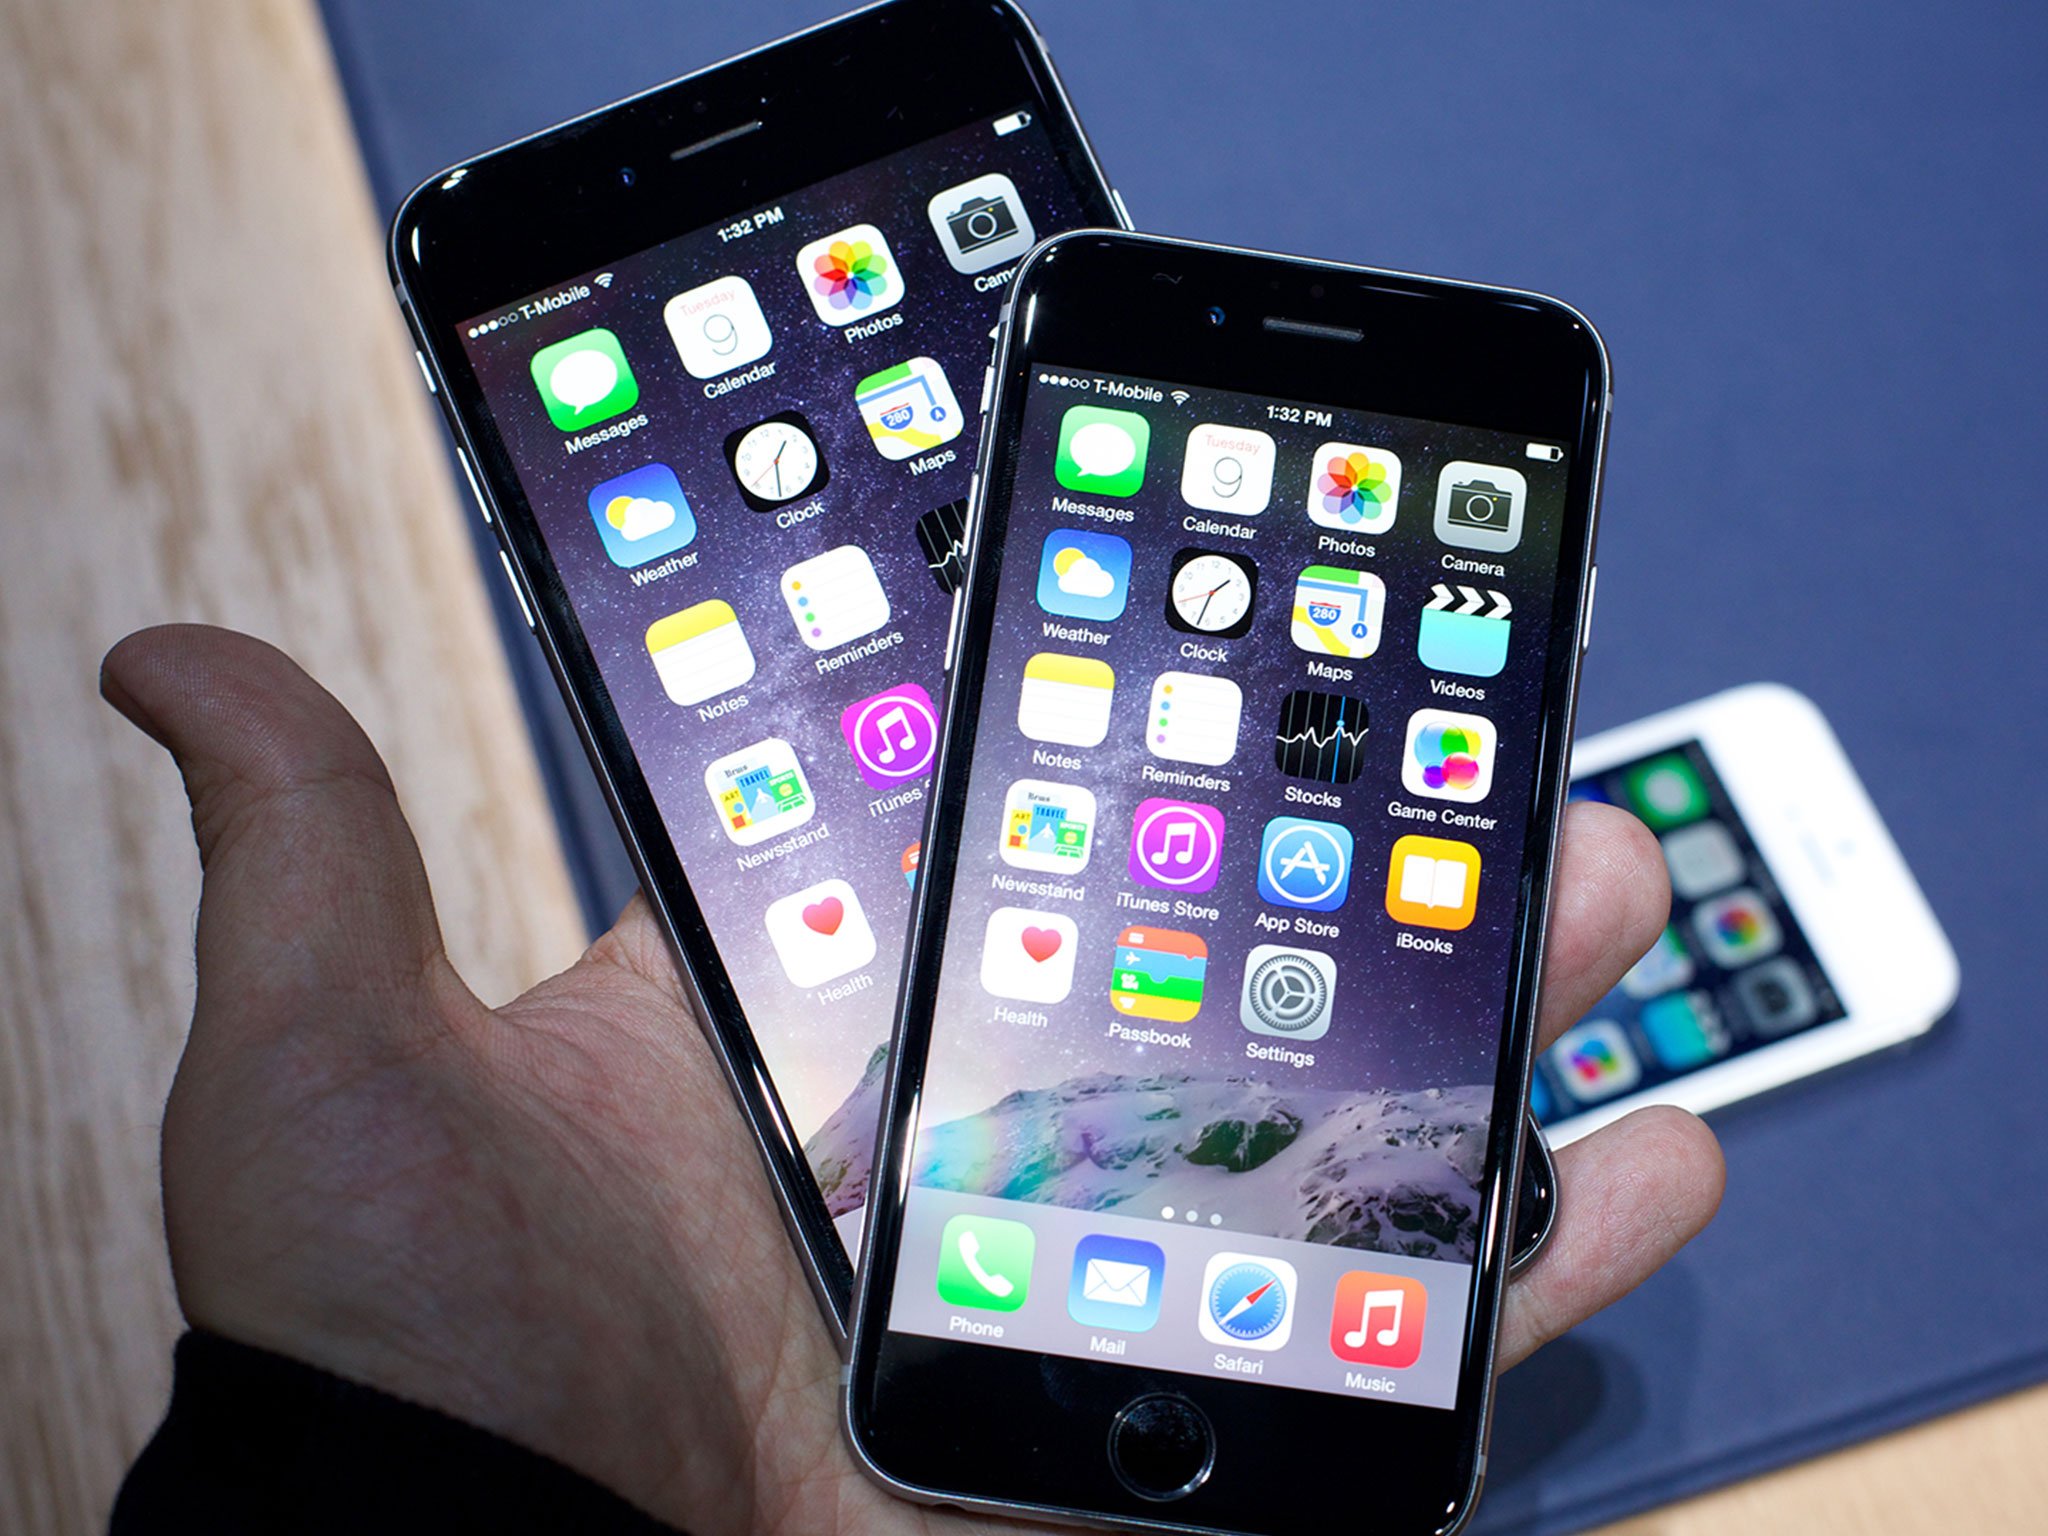 iPhone 6 and iPhone 6 Plus: Should you upgrade?